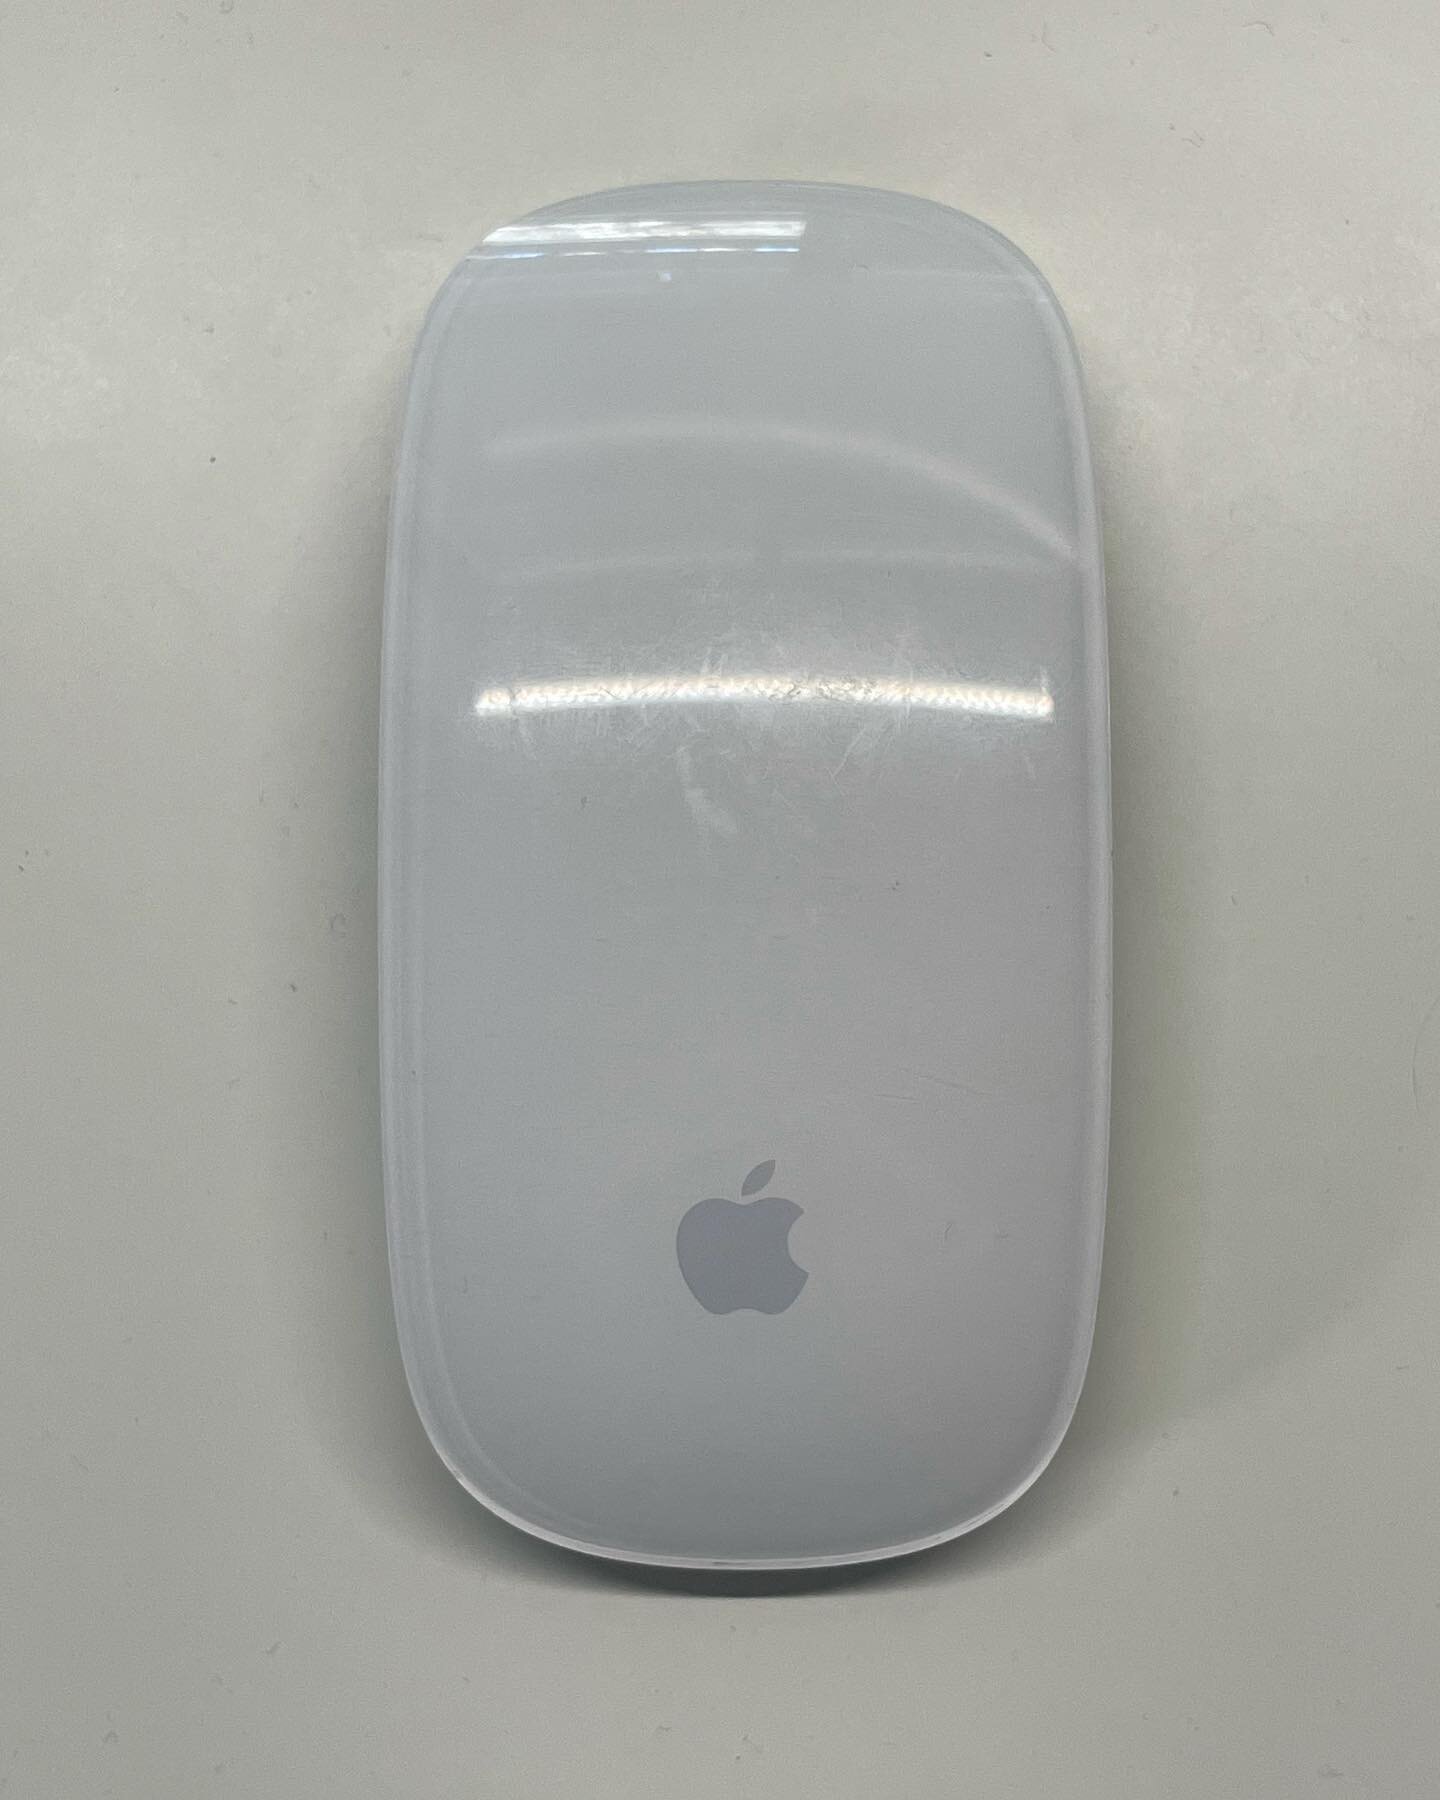 Bought the cheapest apple magic mouse I could find to tear apart. An array of cap sensors line the entire mouse surface, allowing the variety of touch interactions that are possible to create the magic!
&mdash;
The top of the mouse is a transparent p